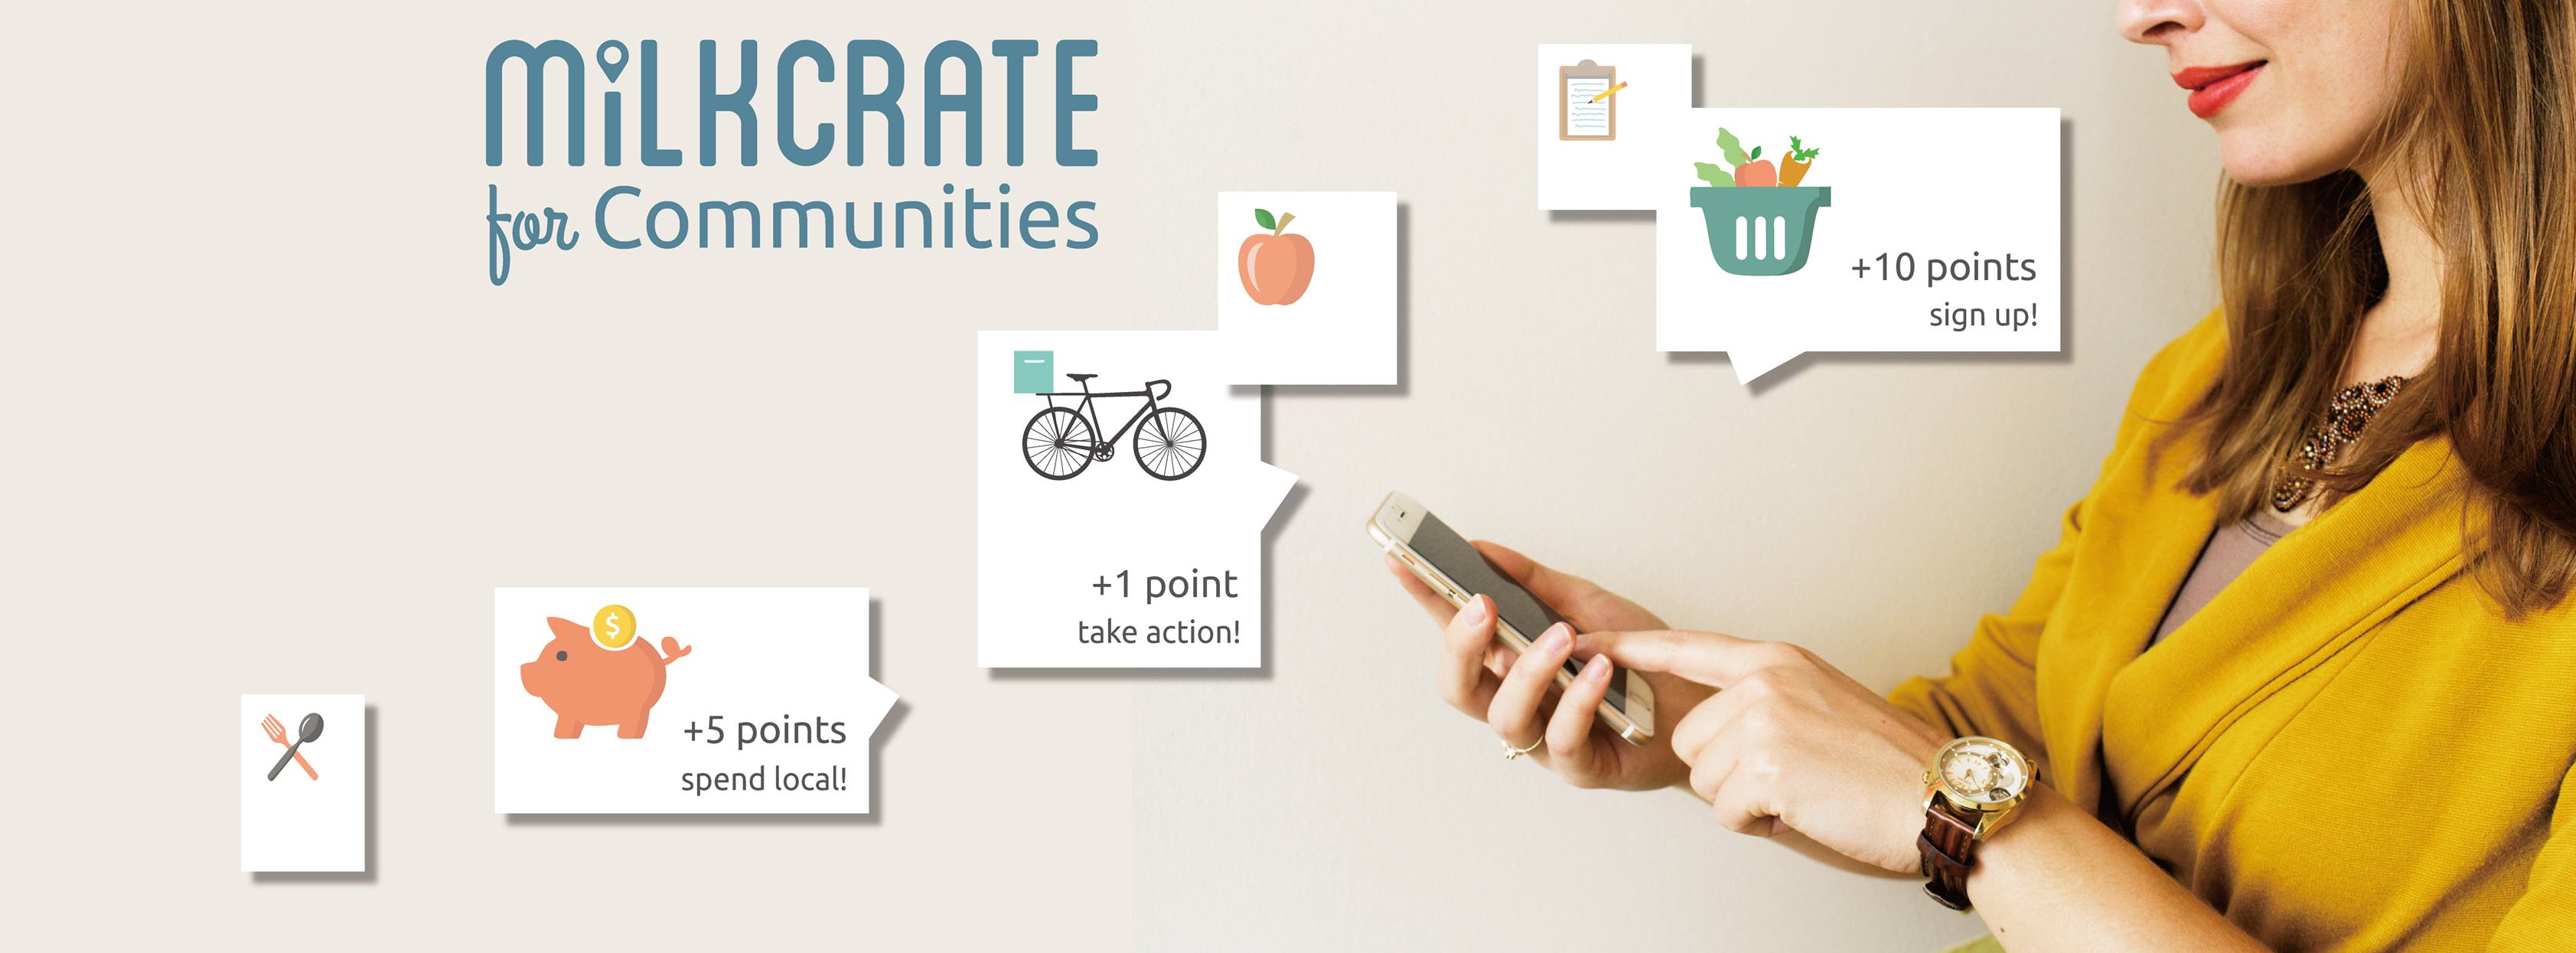 MilkCrate, a social enterprise, encourages both individuals and whole communities to rally around making sustainable lifestyle choices. 